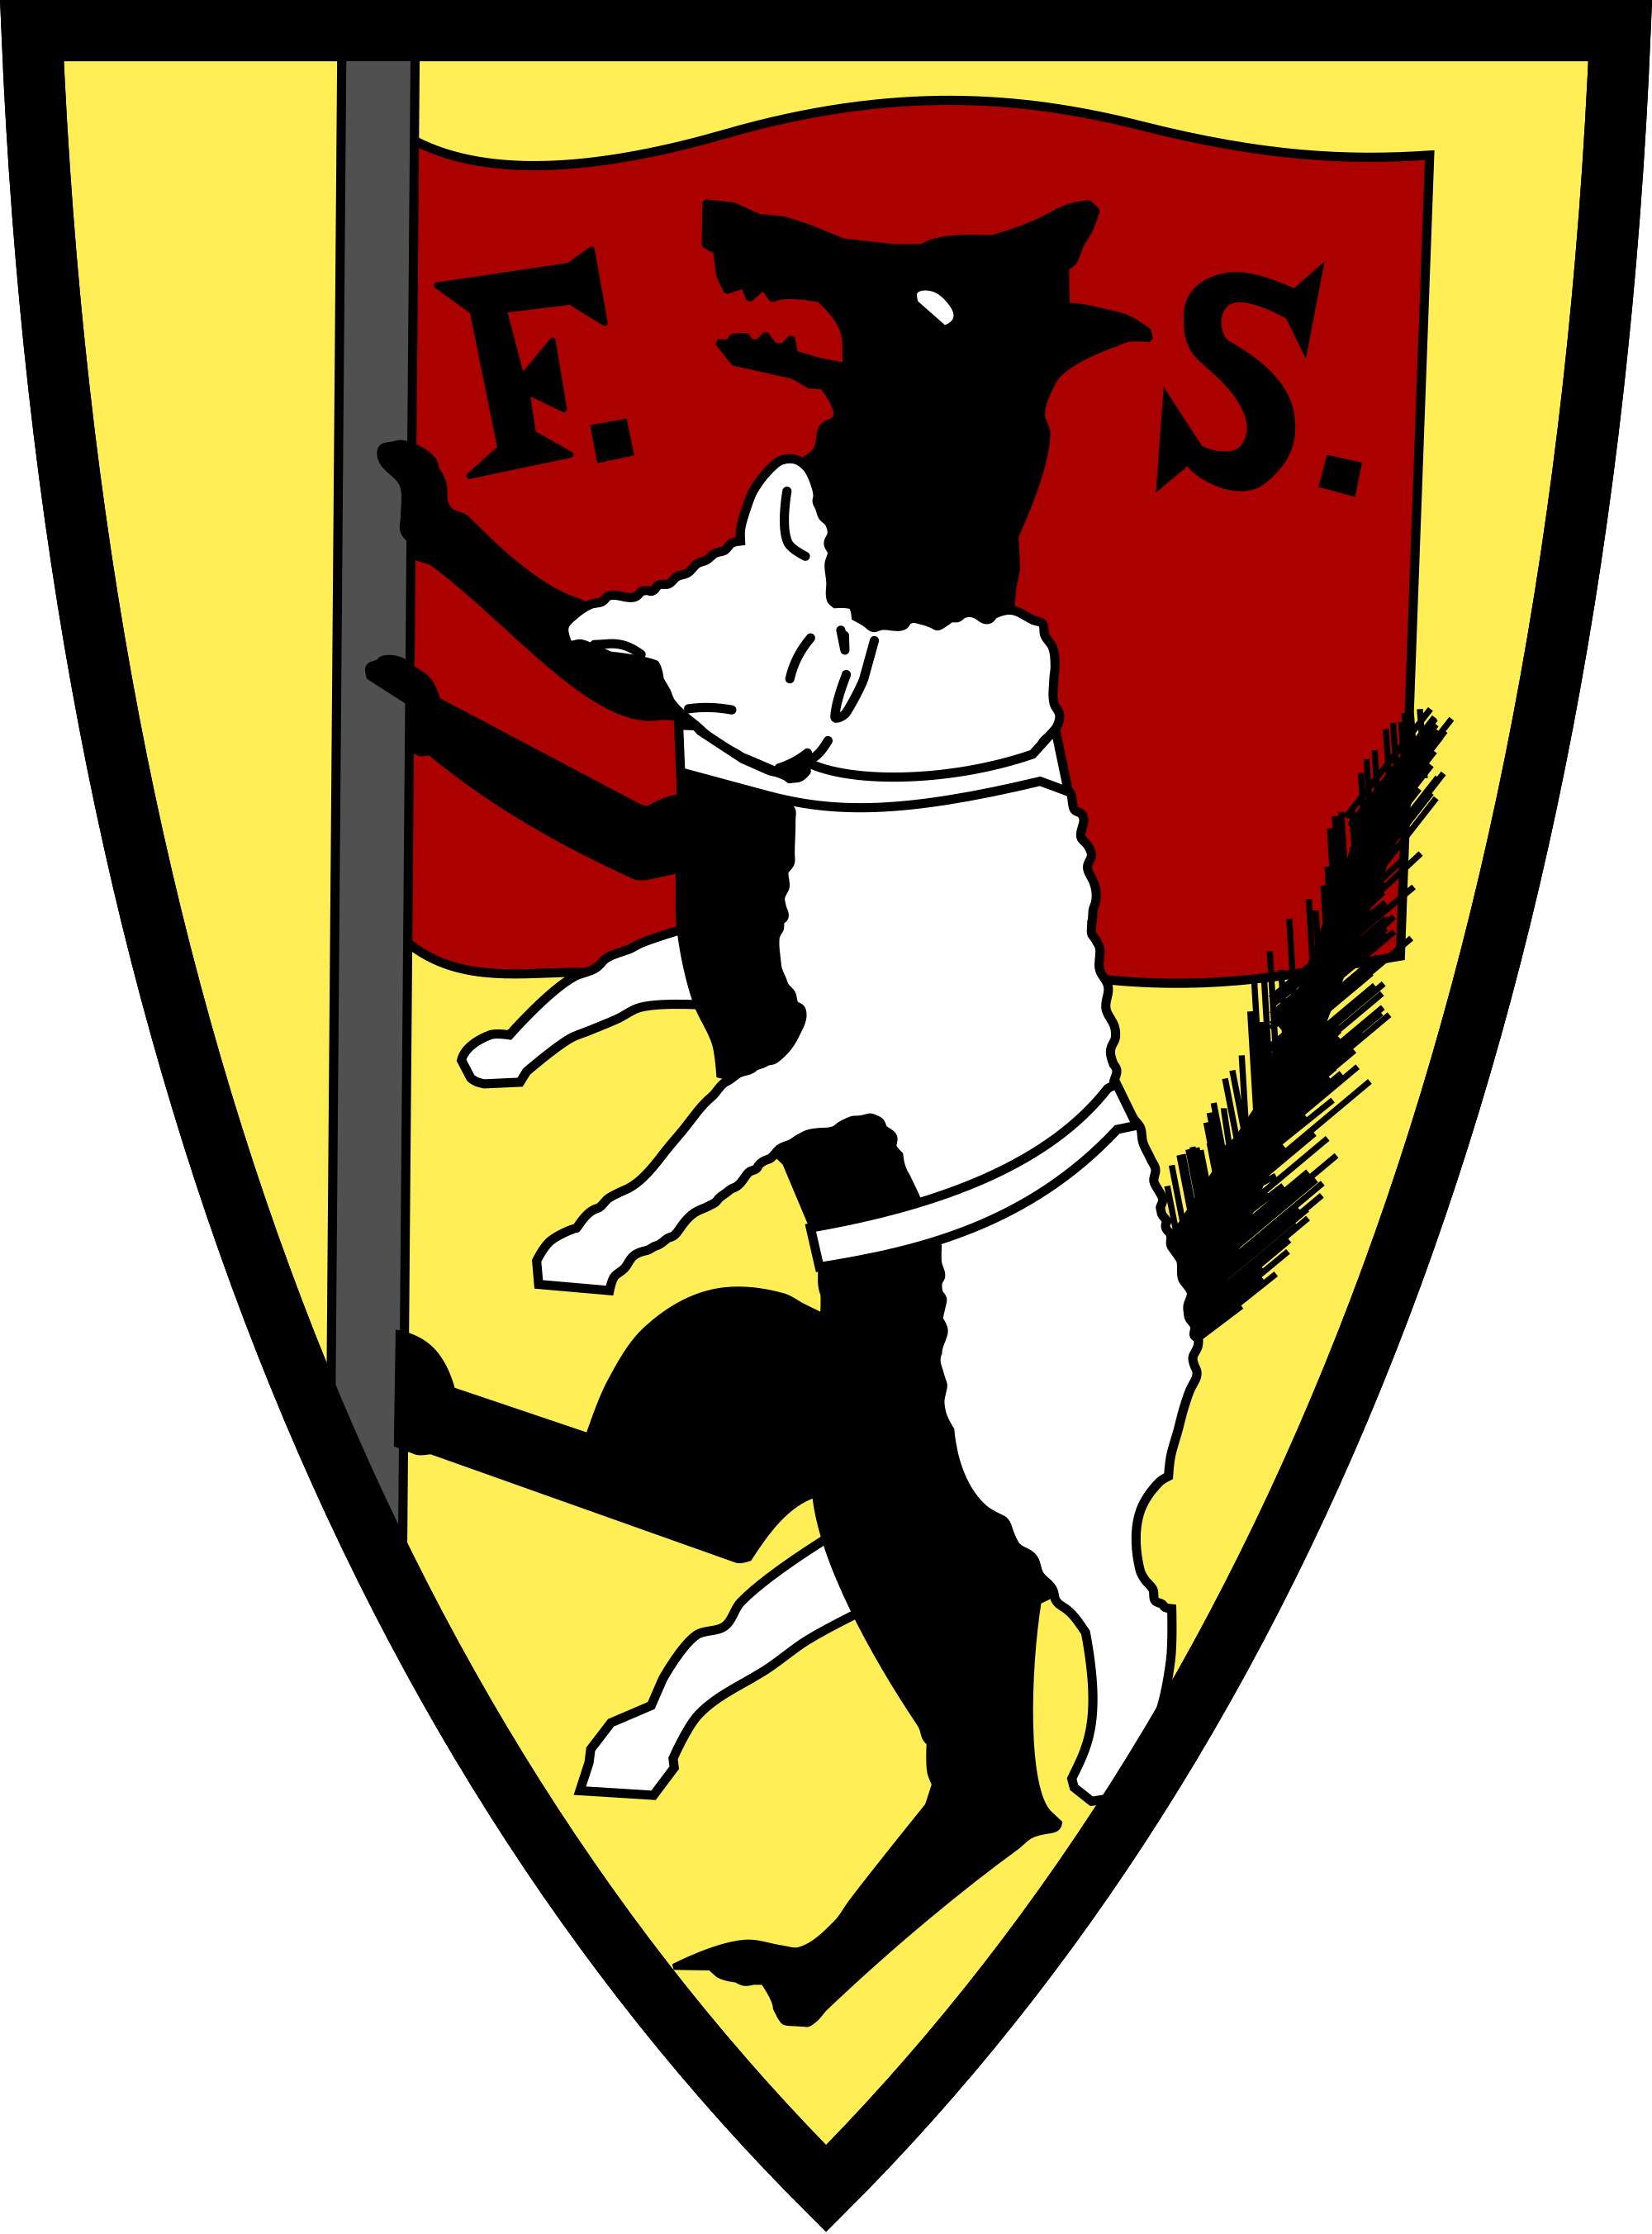 Fabian_Society_coat_of_arms.svg